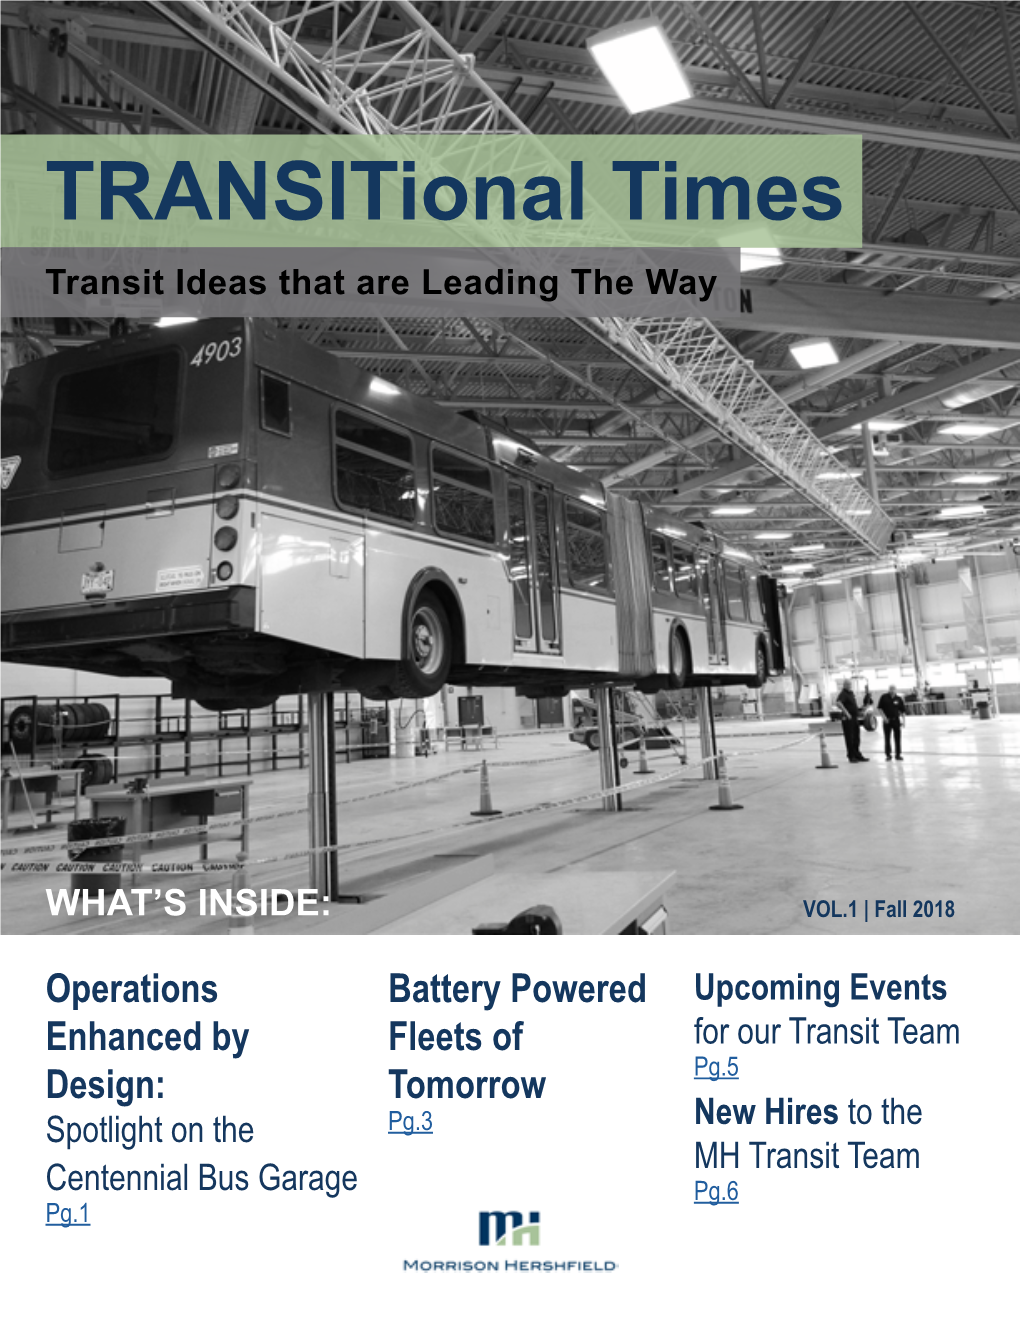 Transitional Times Transit Ideas That Are Leading the Way